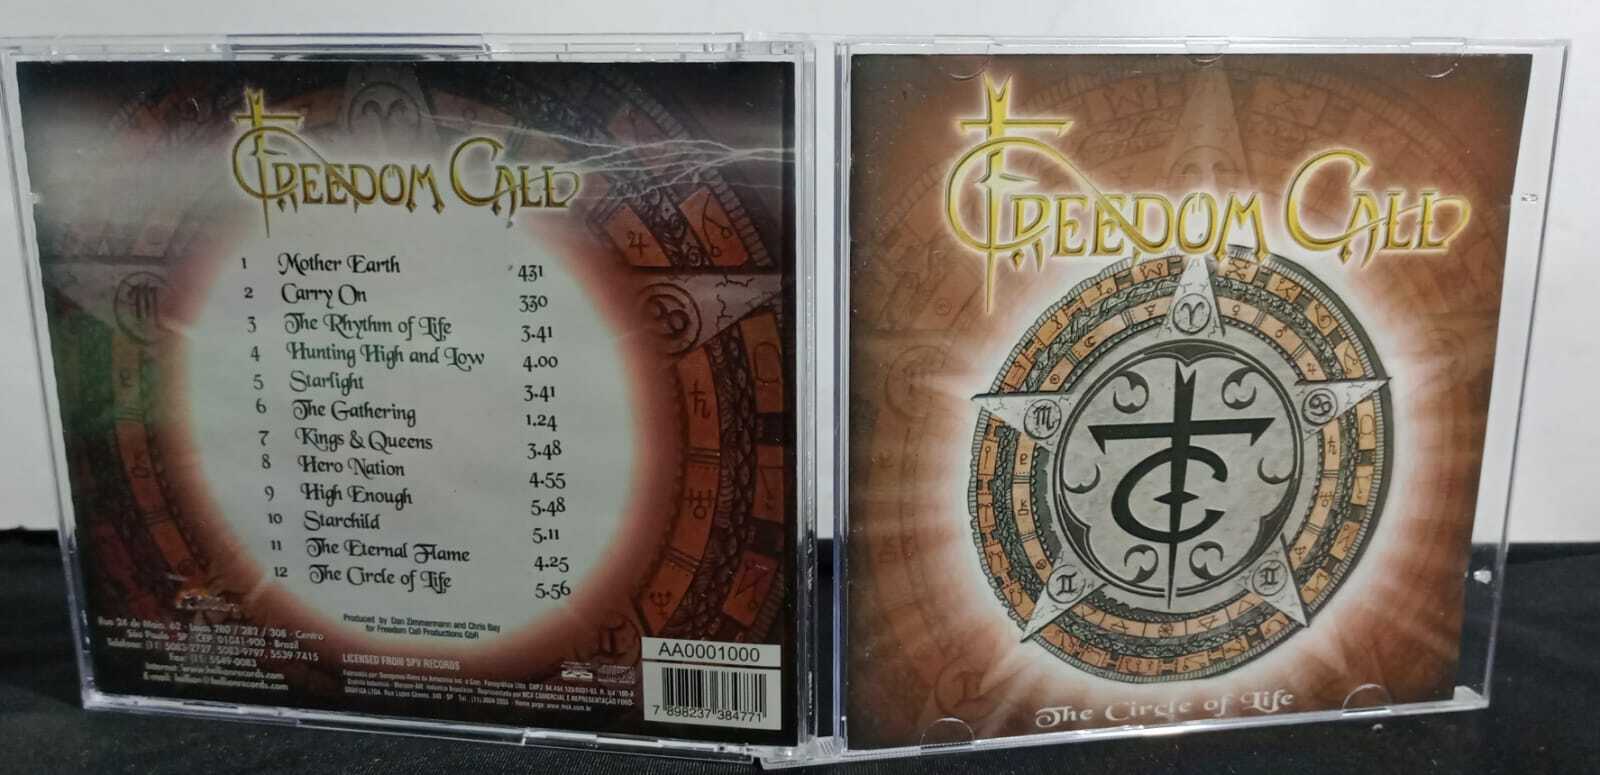 CD - Freedom Call - The Circle Of Life